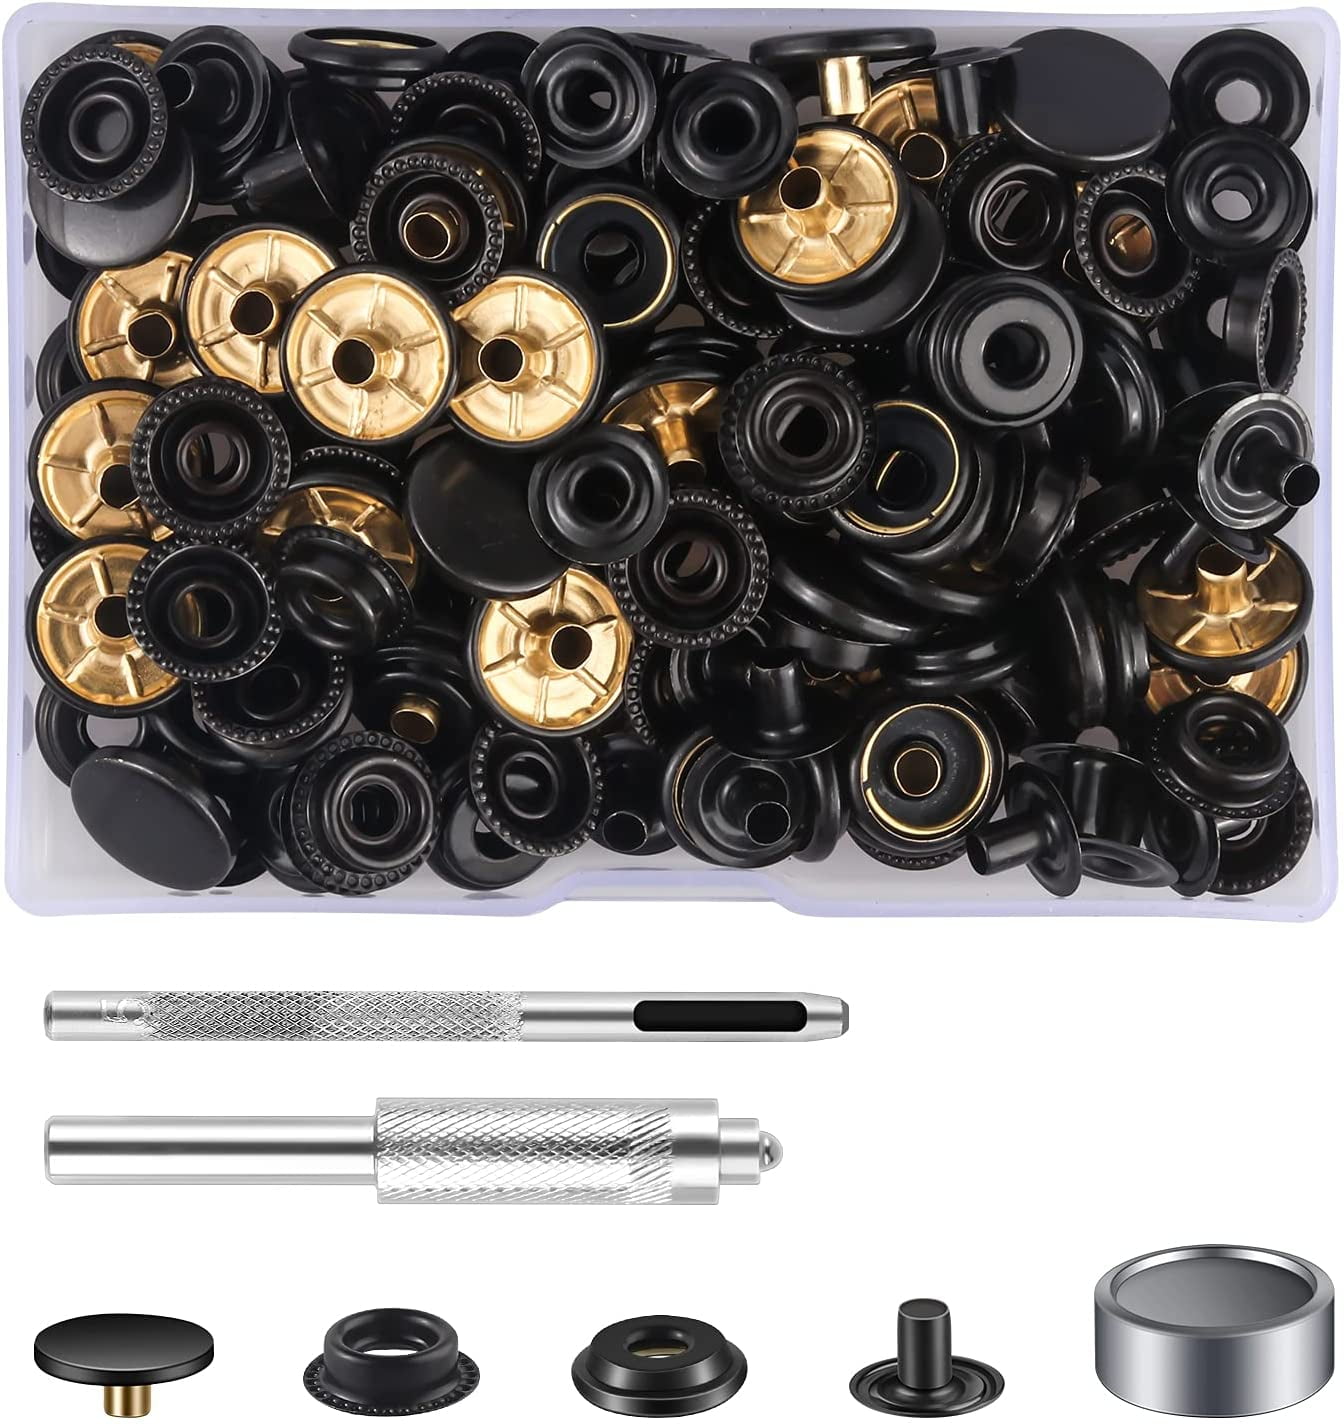 50 SetsPress Studs Cap Button, Stainless Steel Snap Fasteners Kit with Hand  Fixing Tools, Instant Metal Buttons No-Sew Clips Snap for Bags, Jeans